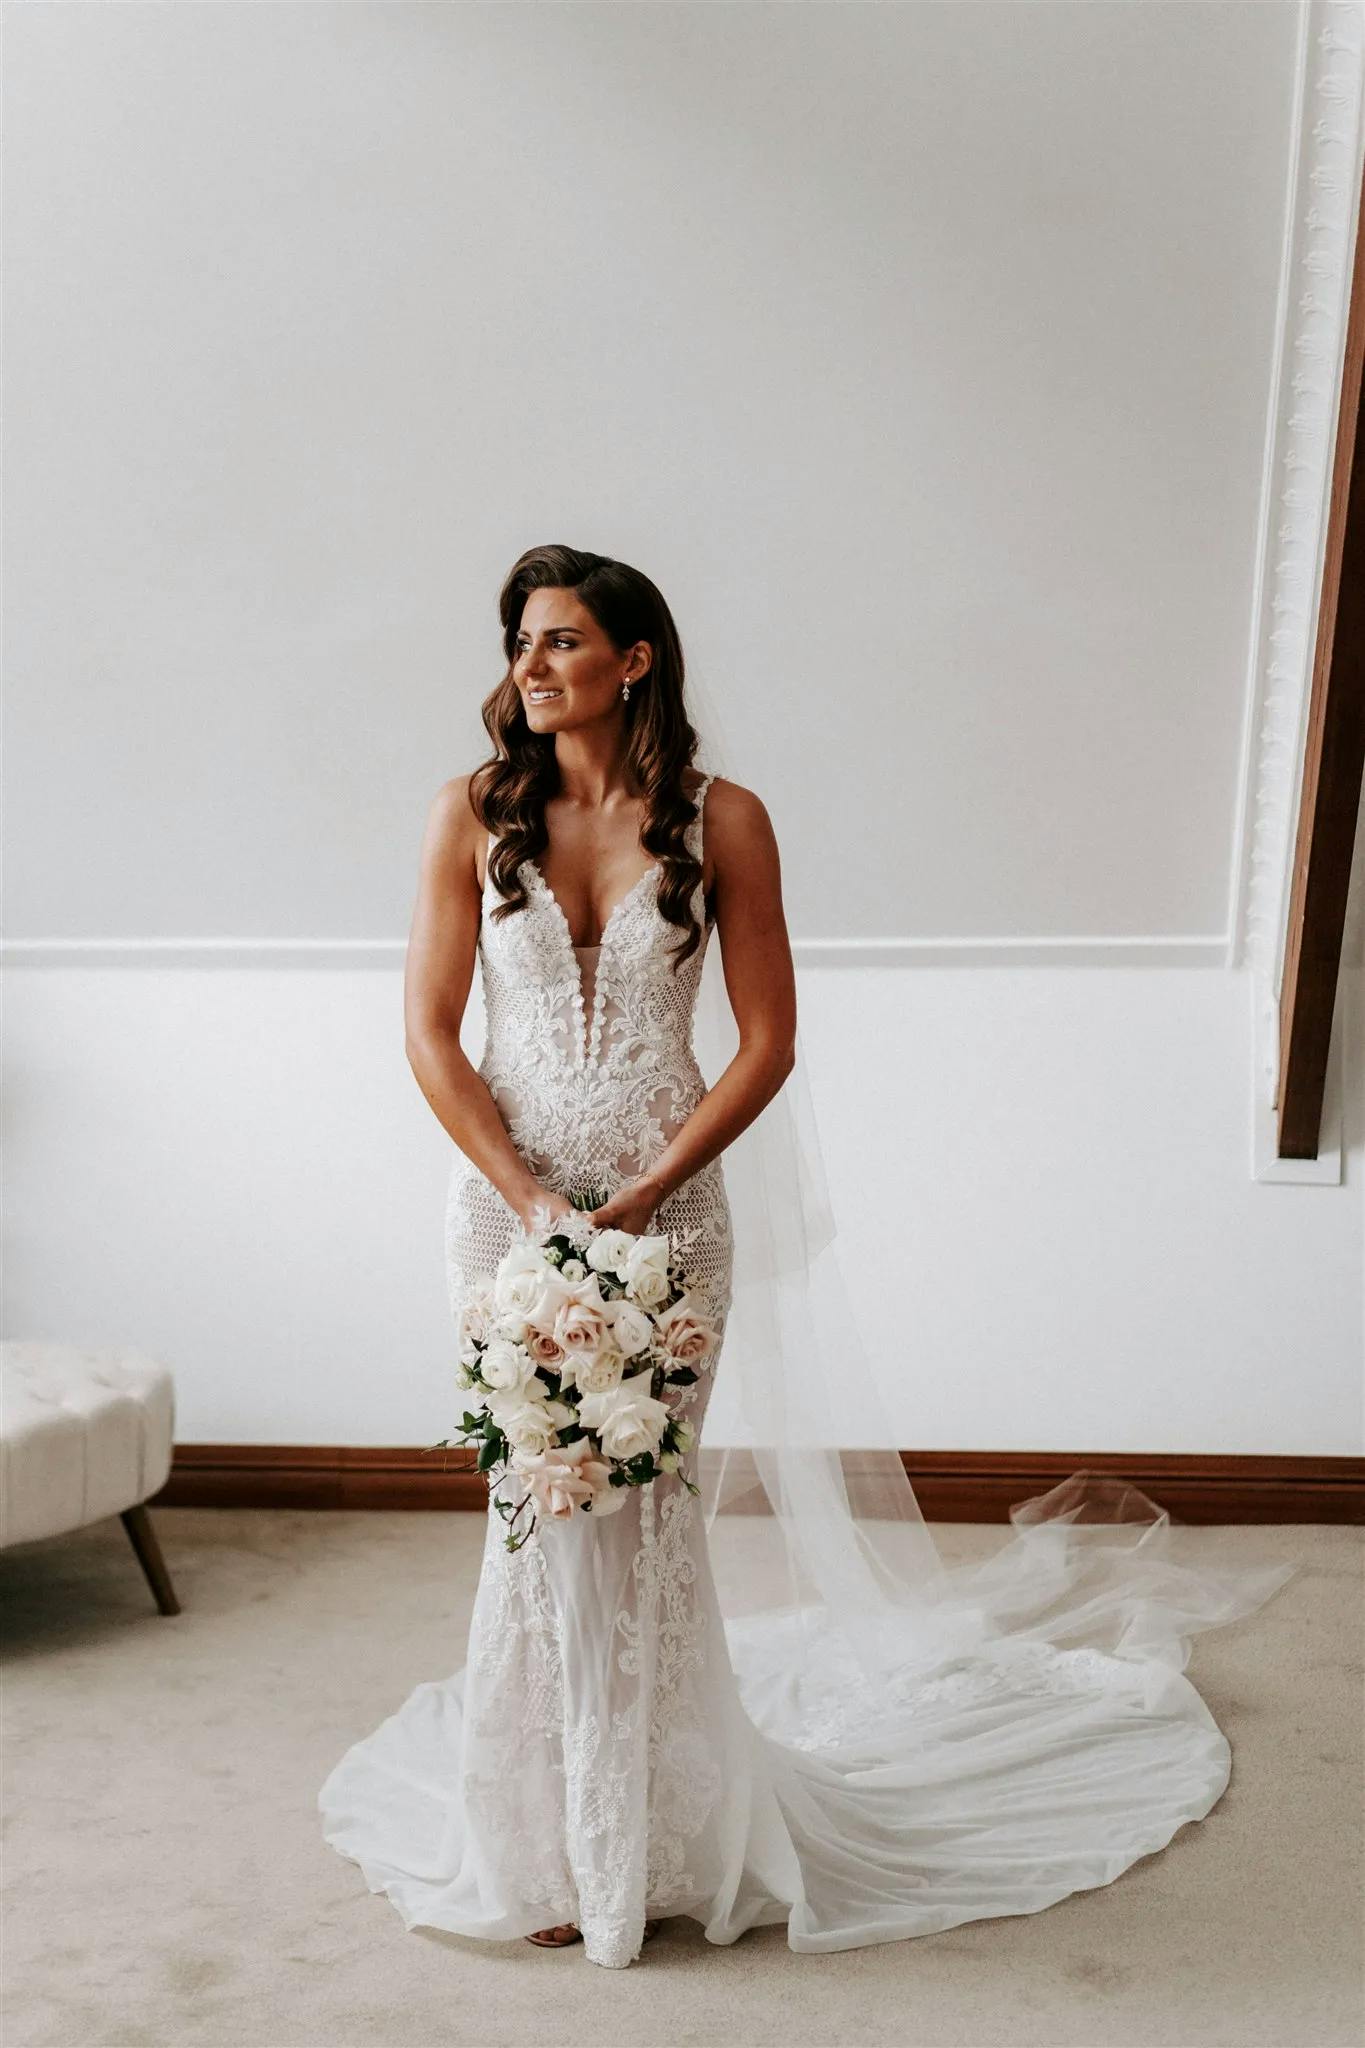 A bride in a white lace wedding dress and veil, holding a bouquet of white and blush flowers. She is standing indoors against a minimalist background and smiling slightly to the side. The train of her dress is spread out behind her on the floor.